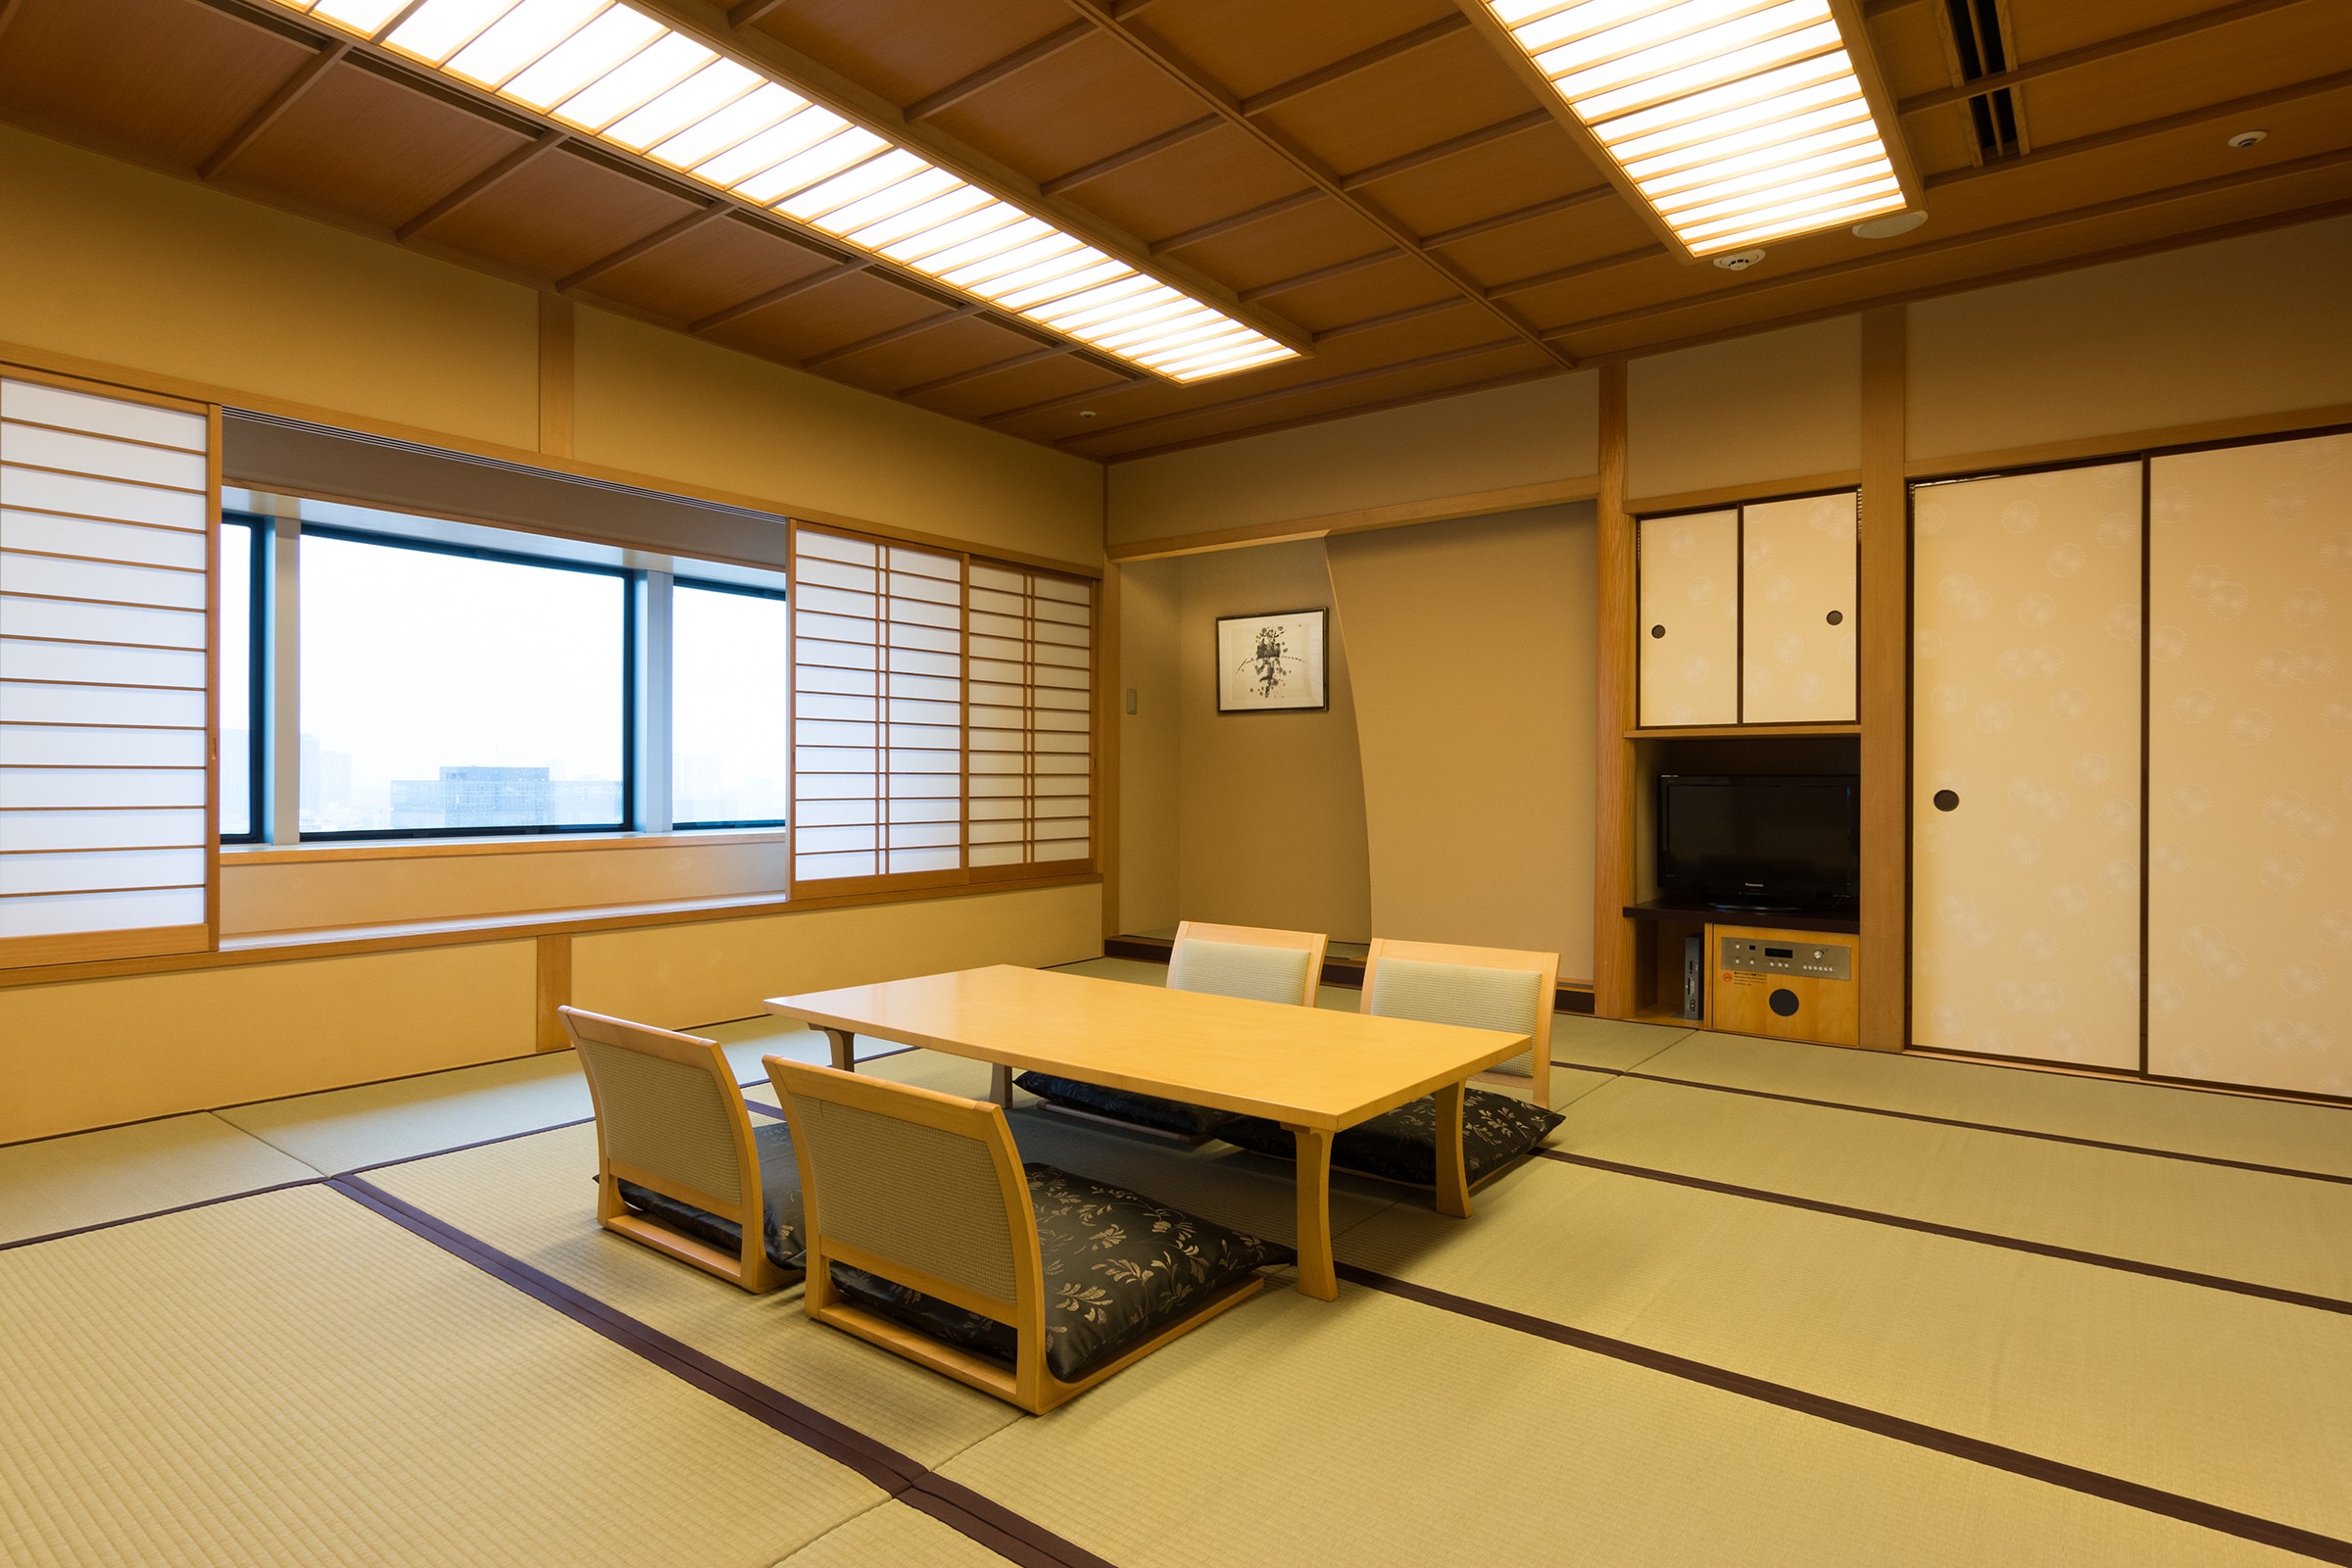 Japanese-style room on the top floor